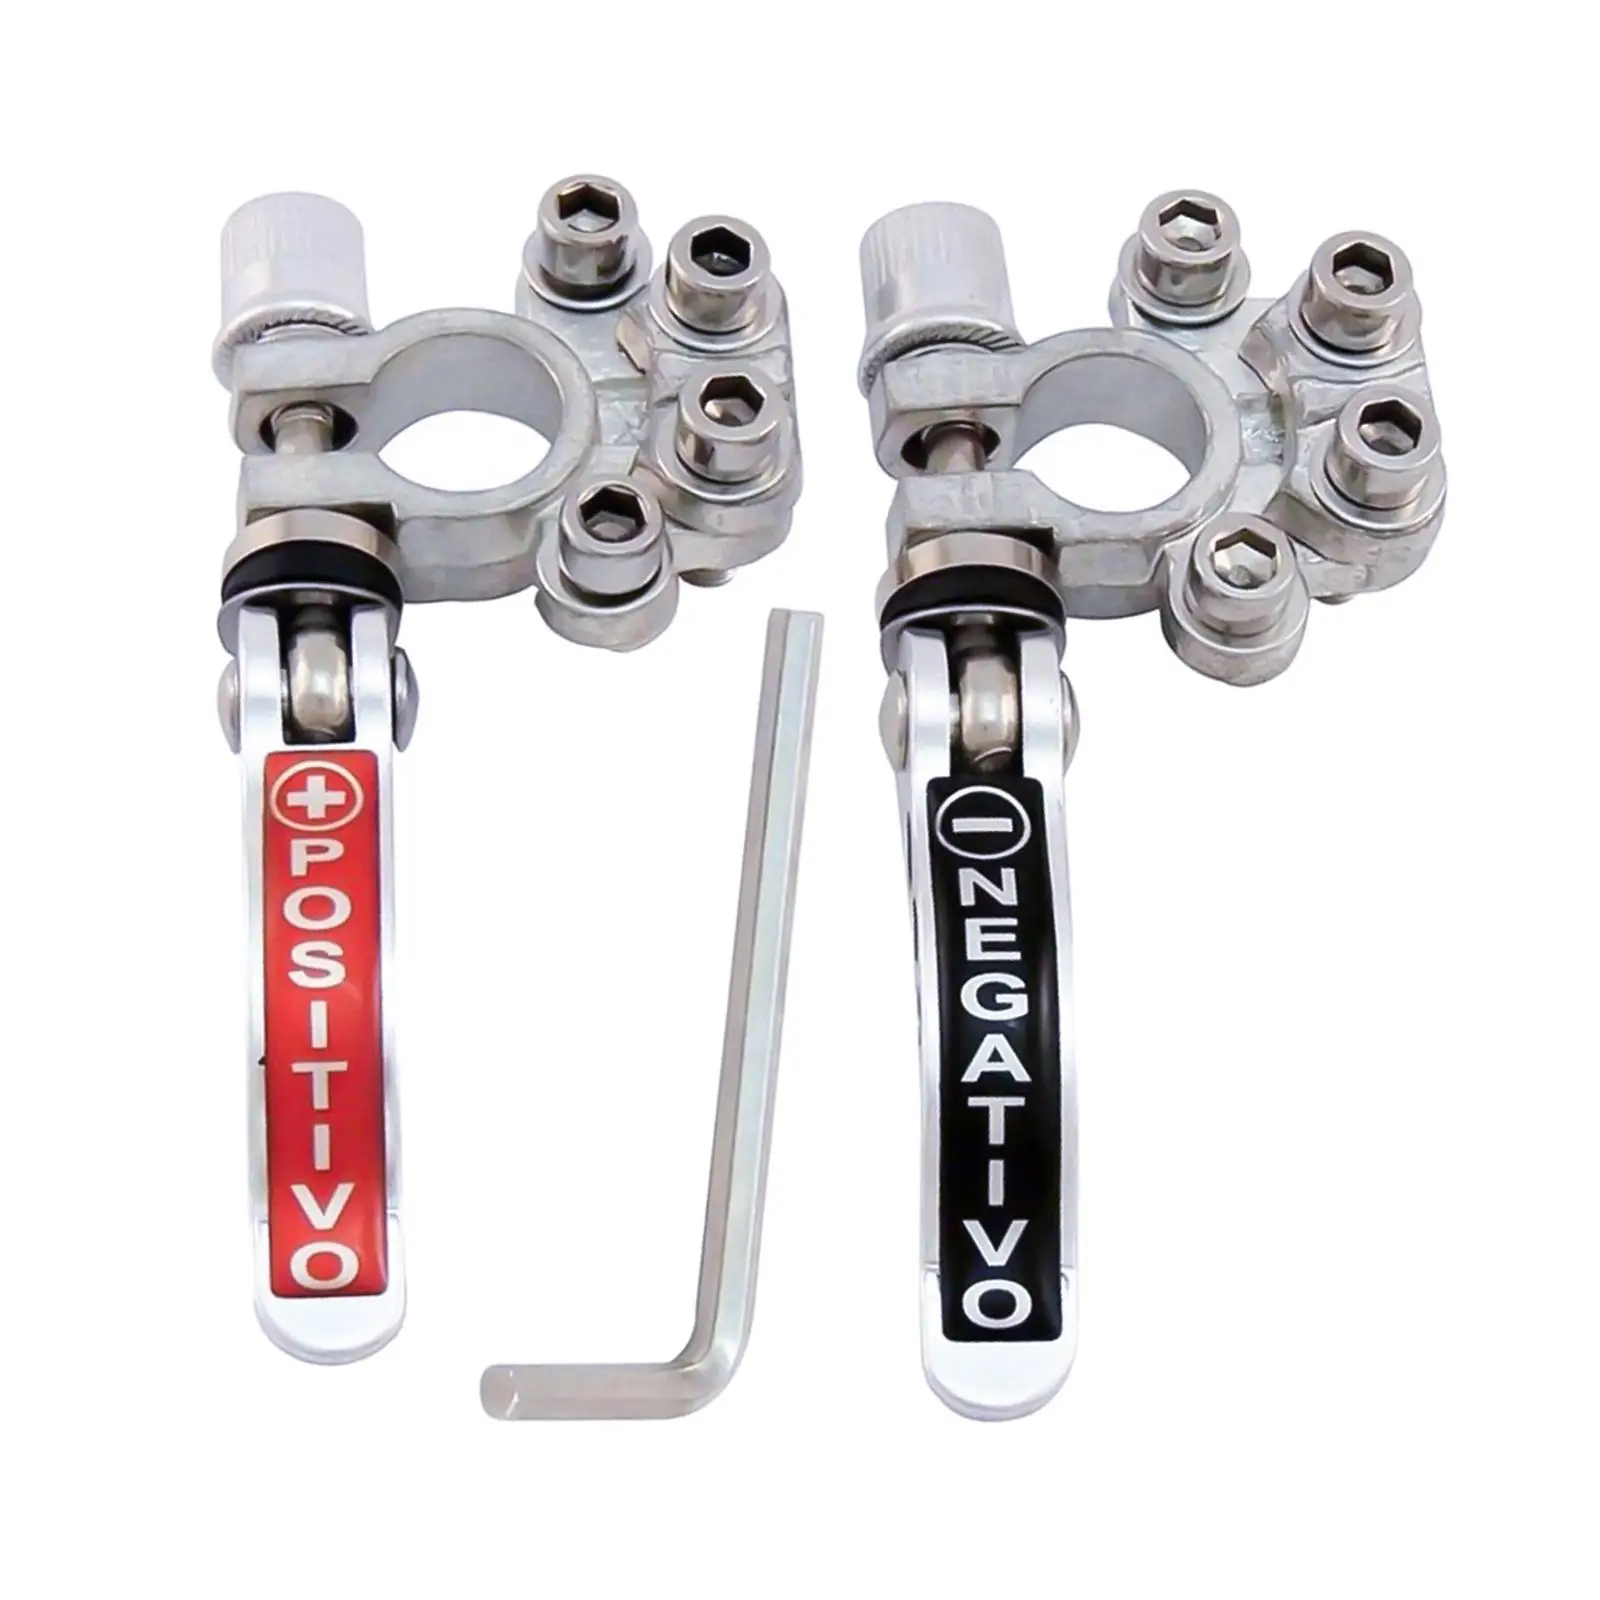 2Pcs Battery Terminal Connectors  Terminal Clamps Connectors for Car Truck  and Negative Pole Battery